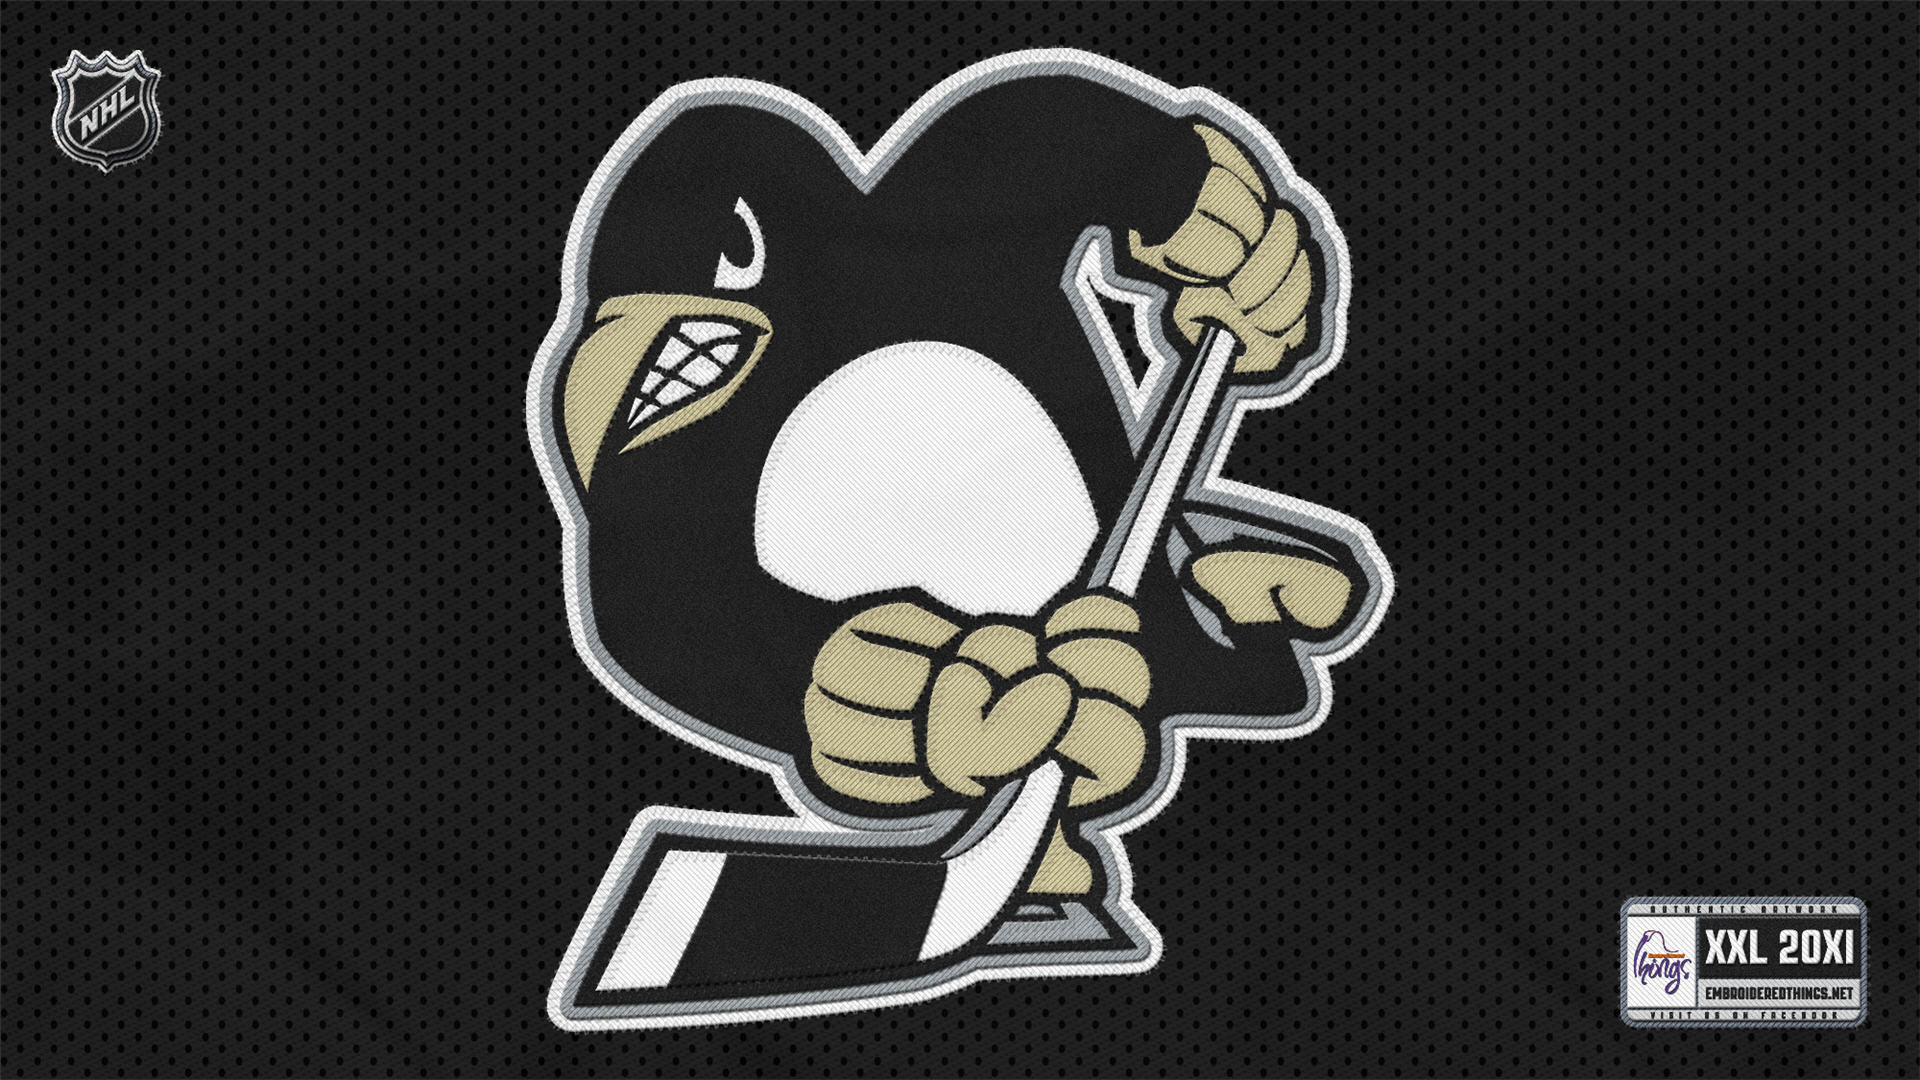 1920x1080 Pittsburgh Penguin Wallpapers, 100% Quality HD Images